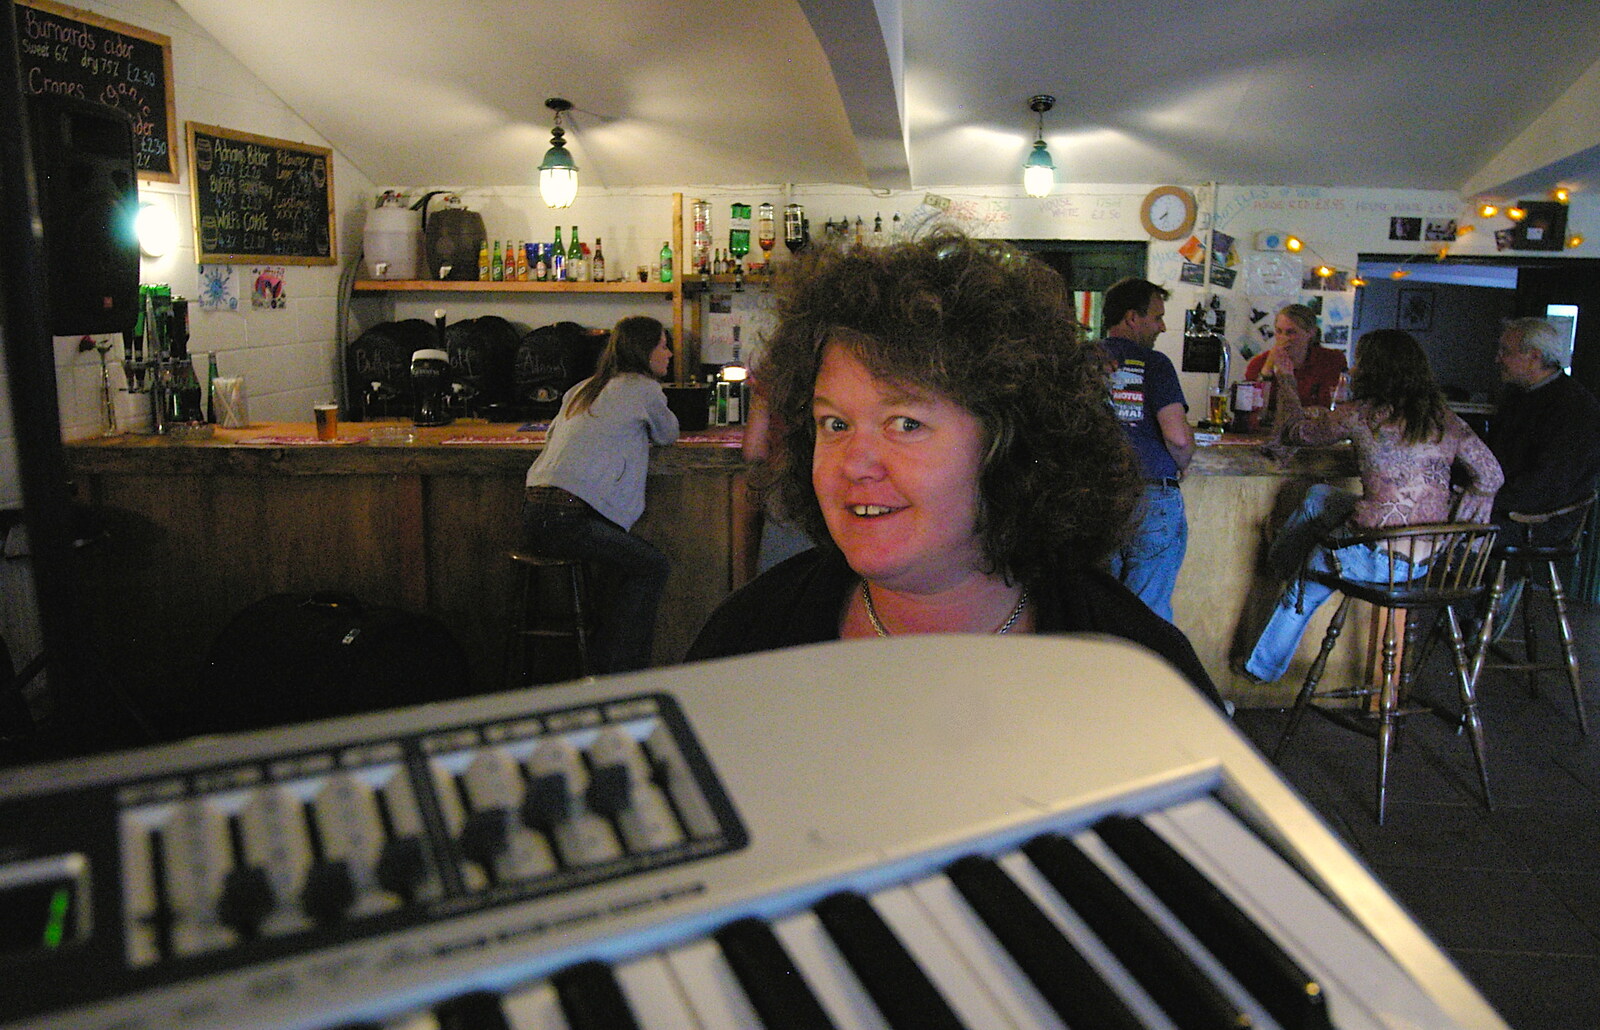 Jo looks over the keyboards from The BBS, and the Big Skies of East Anglia, Diss and Hunston, Norfolk and Suffolk - 6th August 2005